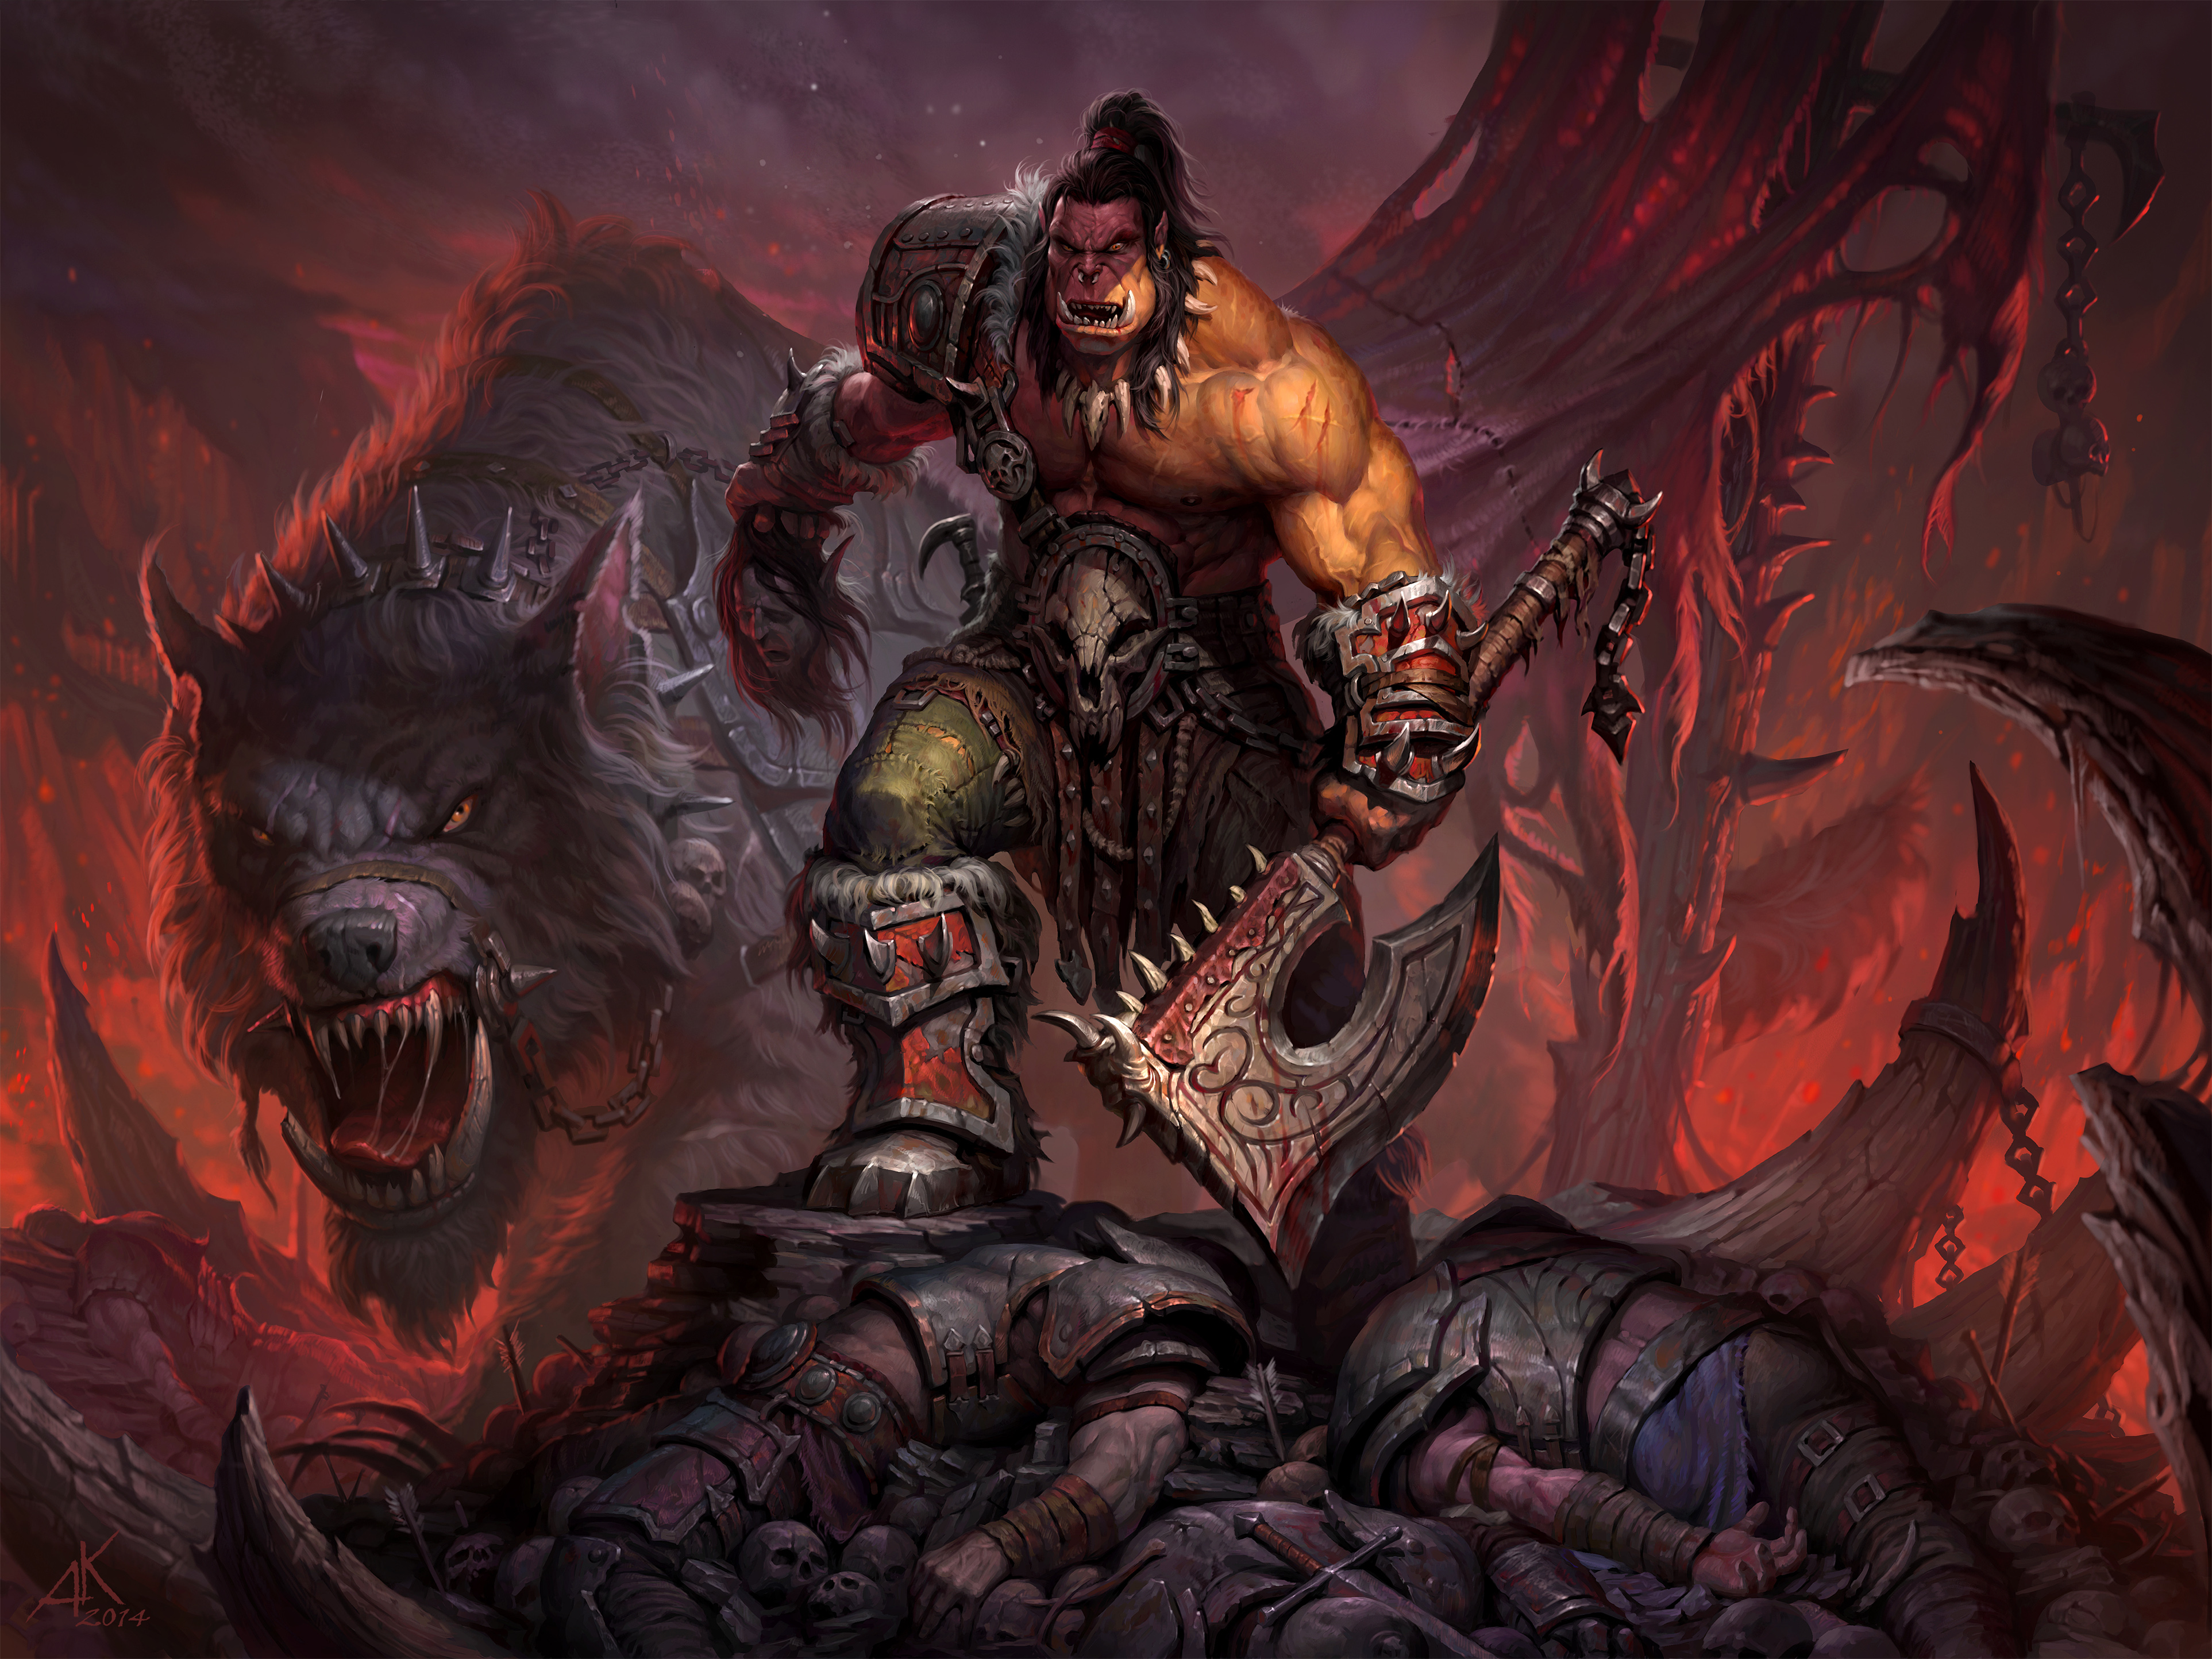 World Of Warcraft: Warlords Of Draenor #2